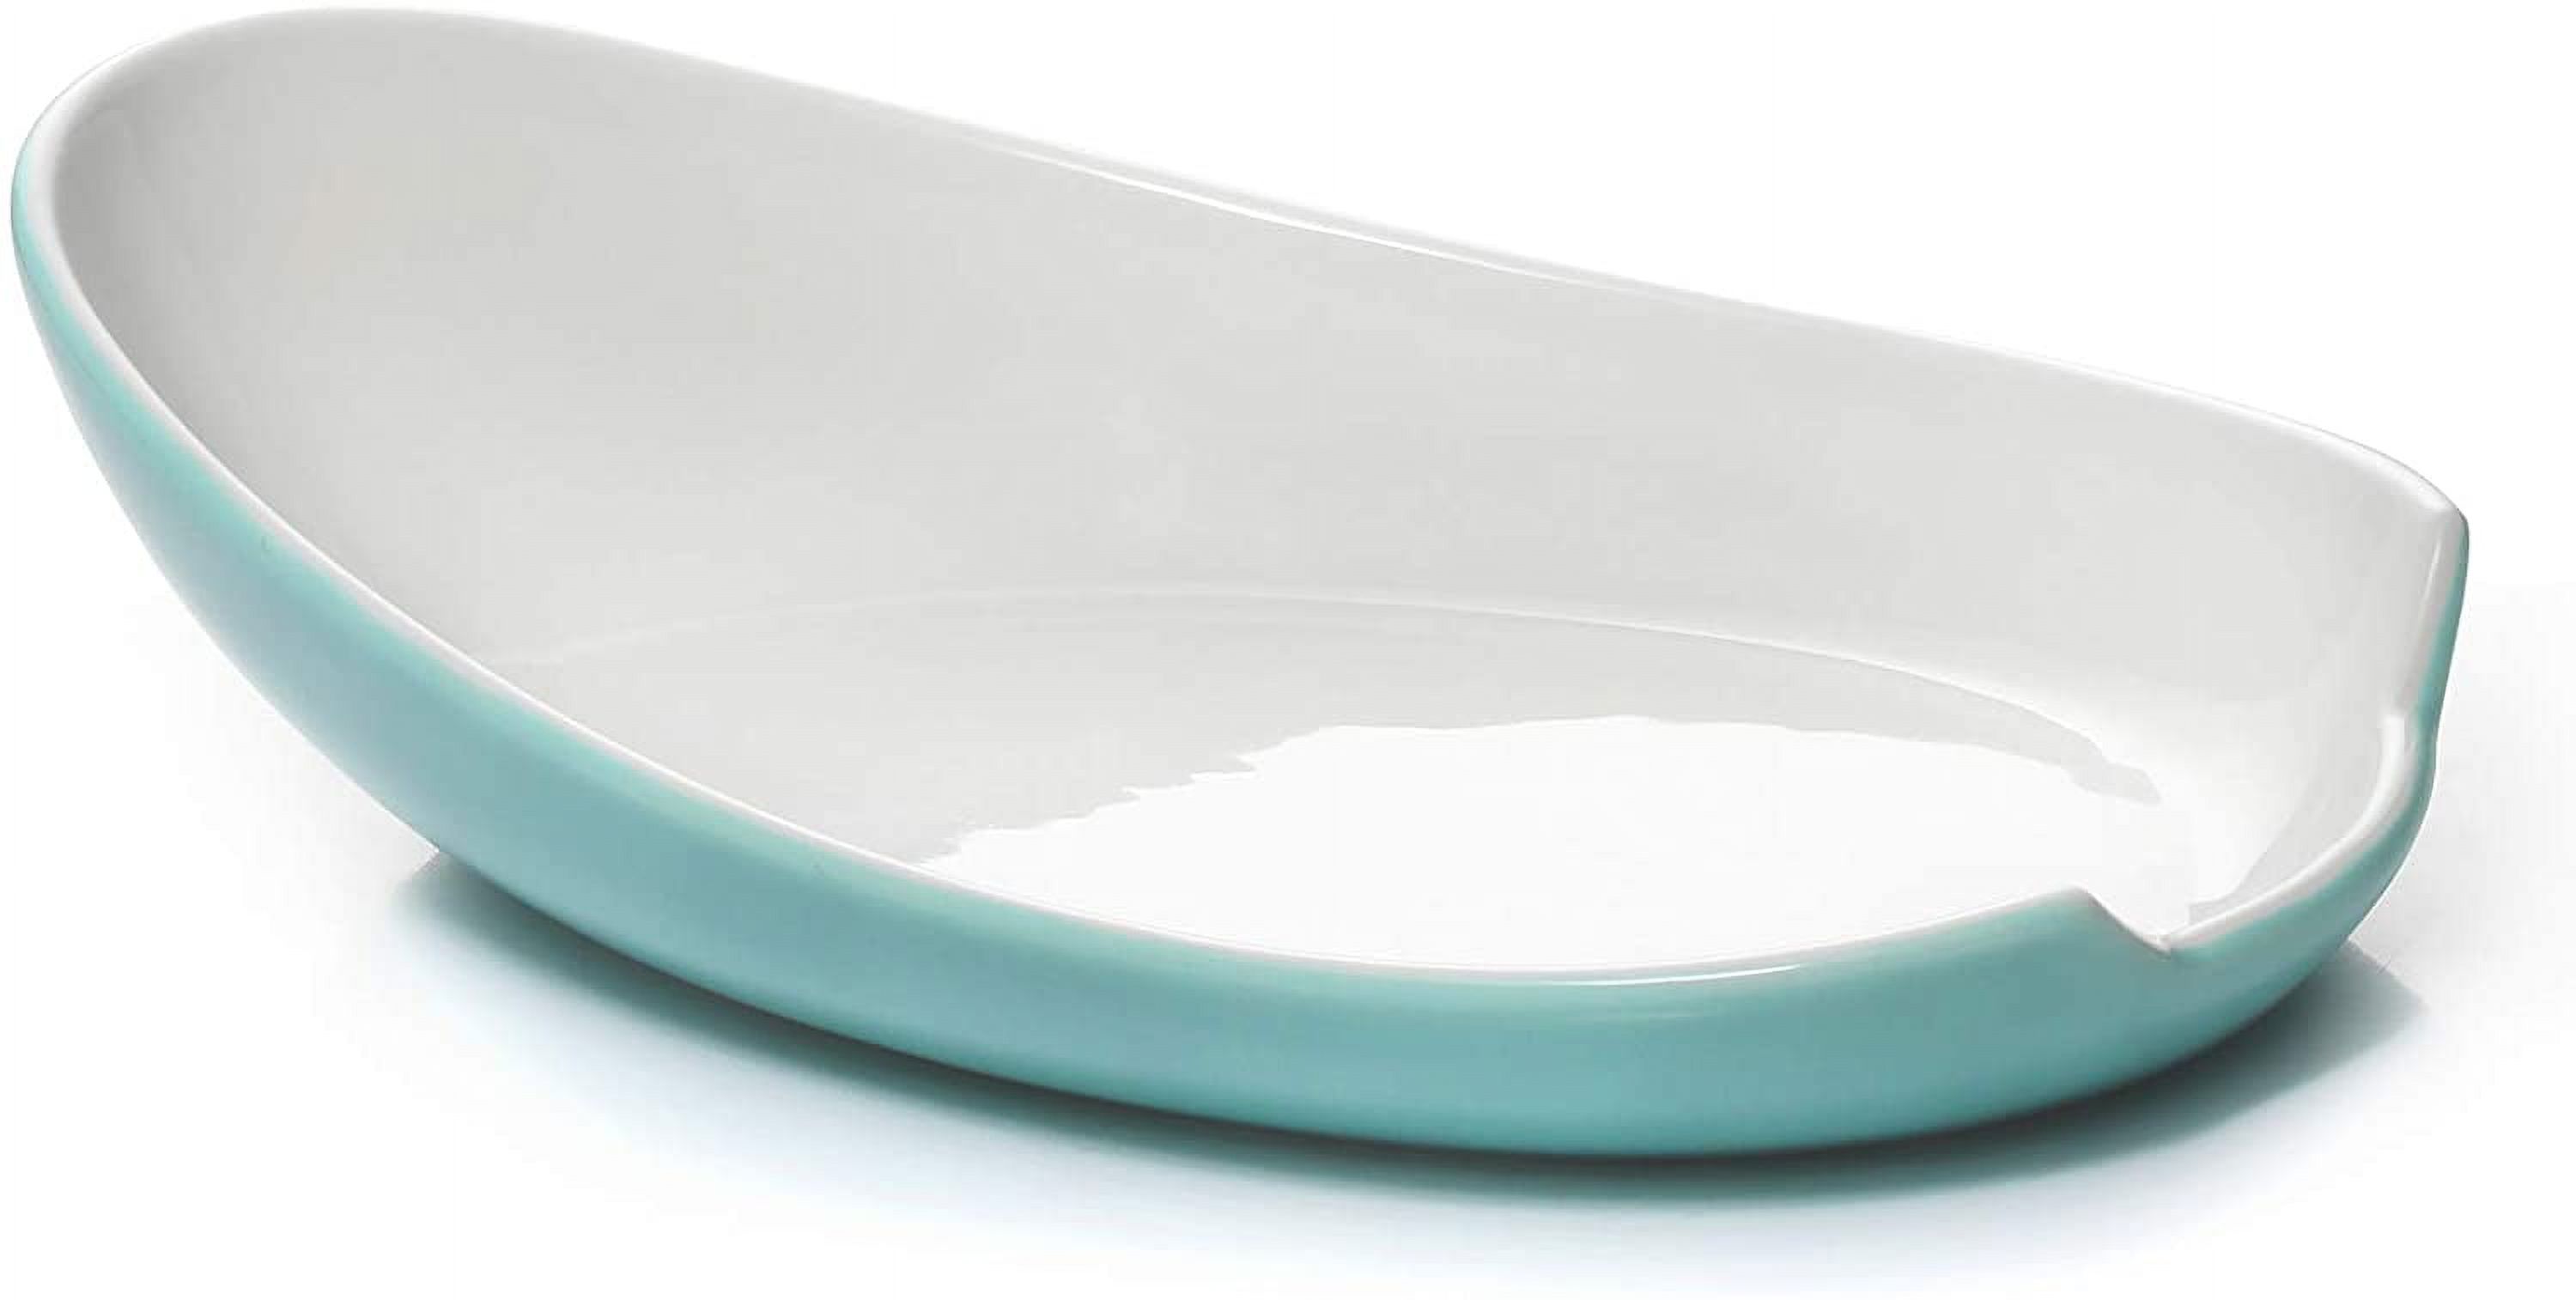 DOWAN Spoon Rest for kitchen Counter, 7.36" Large Spoon Holder for Stove Top, Ceramic Cooking Spoon Rest, Farmhouse Ladle Rest, Cute Kitchen Decor and Accessories, Turquoise - image 1 of 21